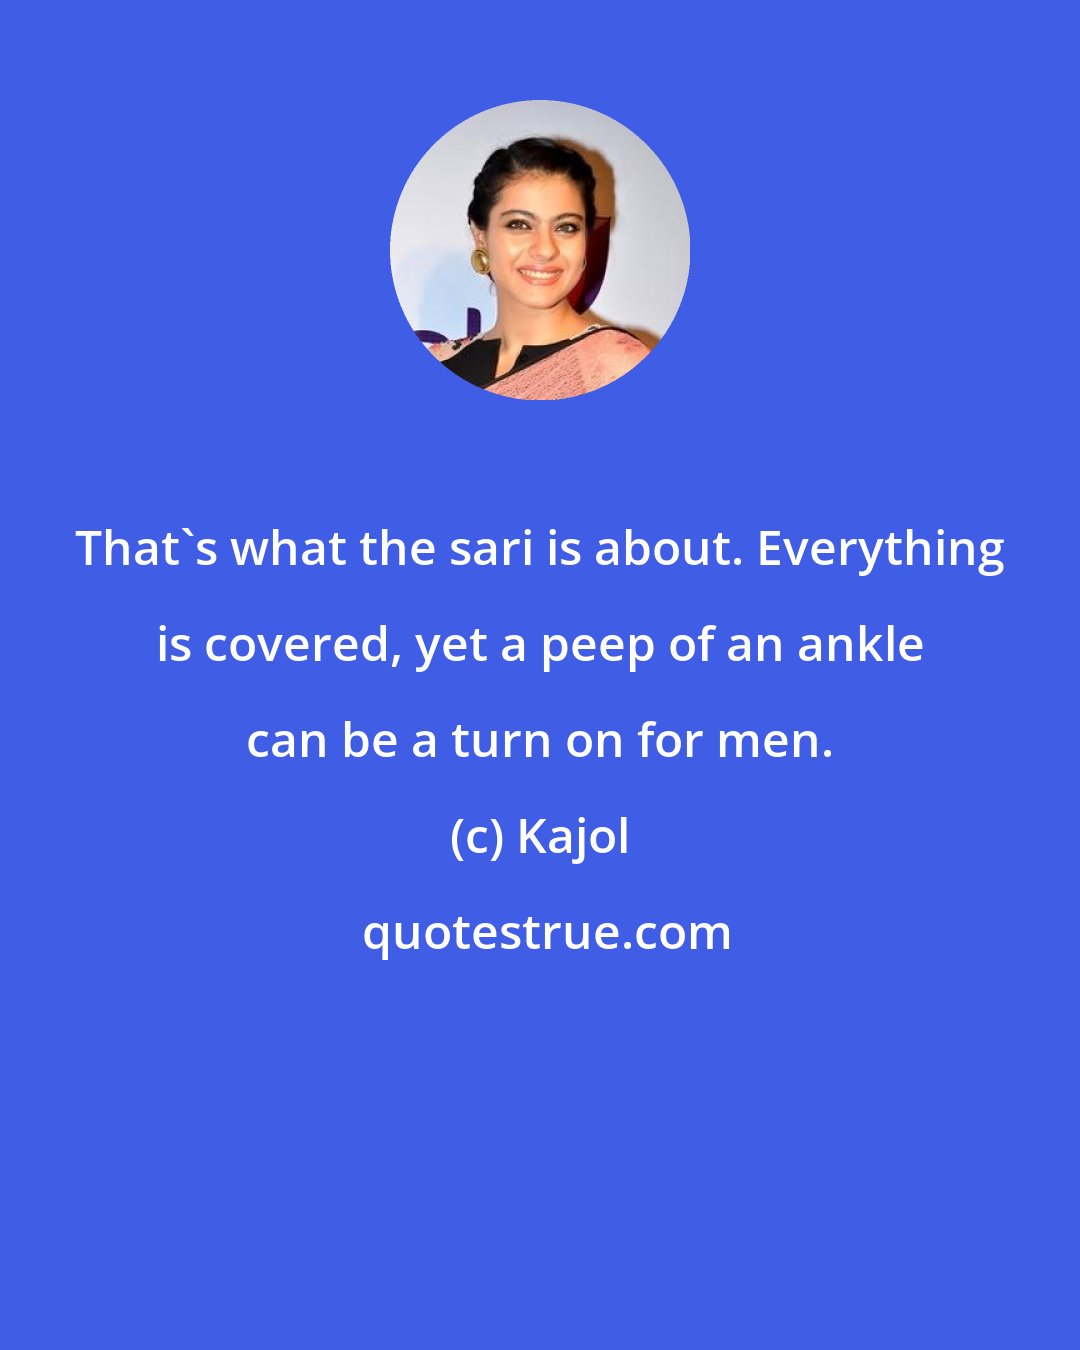 Kajol: That's what the sari is about. Everything is covered, yet a peep of an ankle can be a turn on for men.